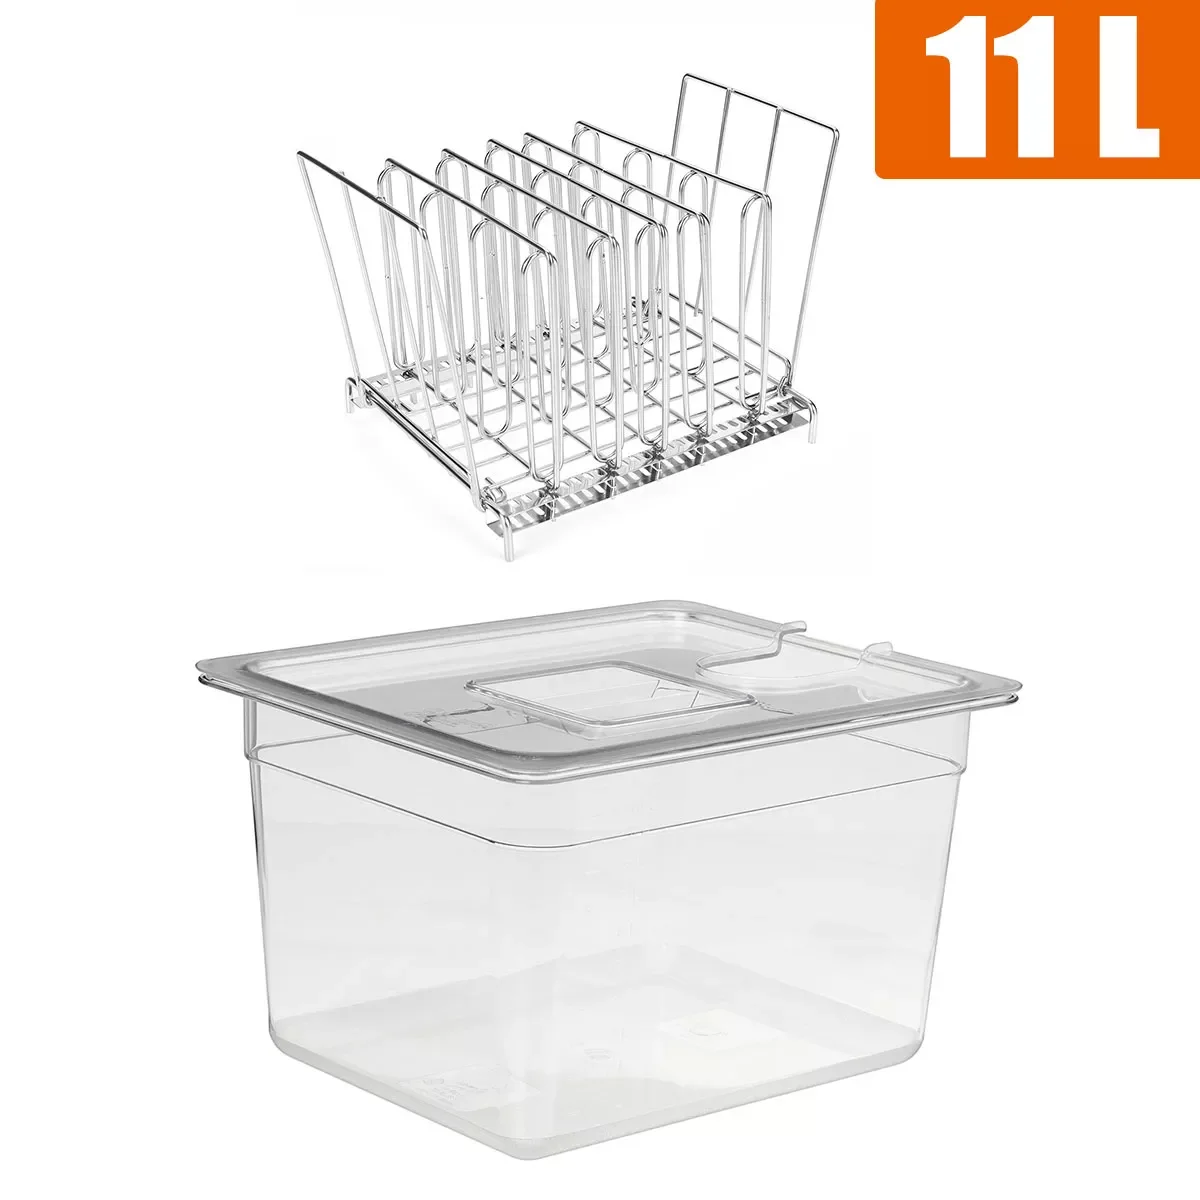 

Stainless Steel Sous Vide Rack and 11L Sous Vide Cooker Containers Sets Detachable Dividers Separator for Immersion Circulators